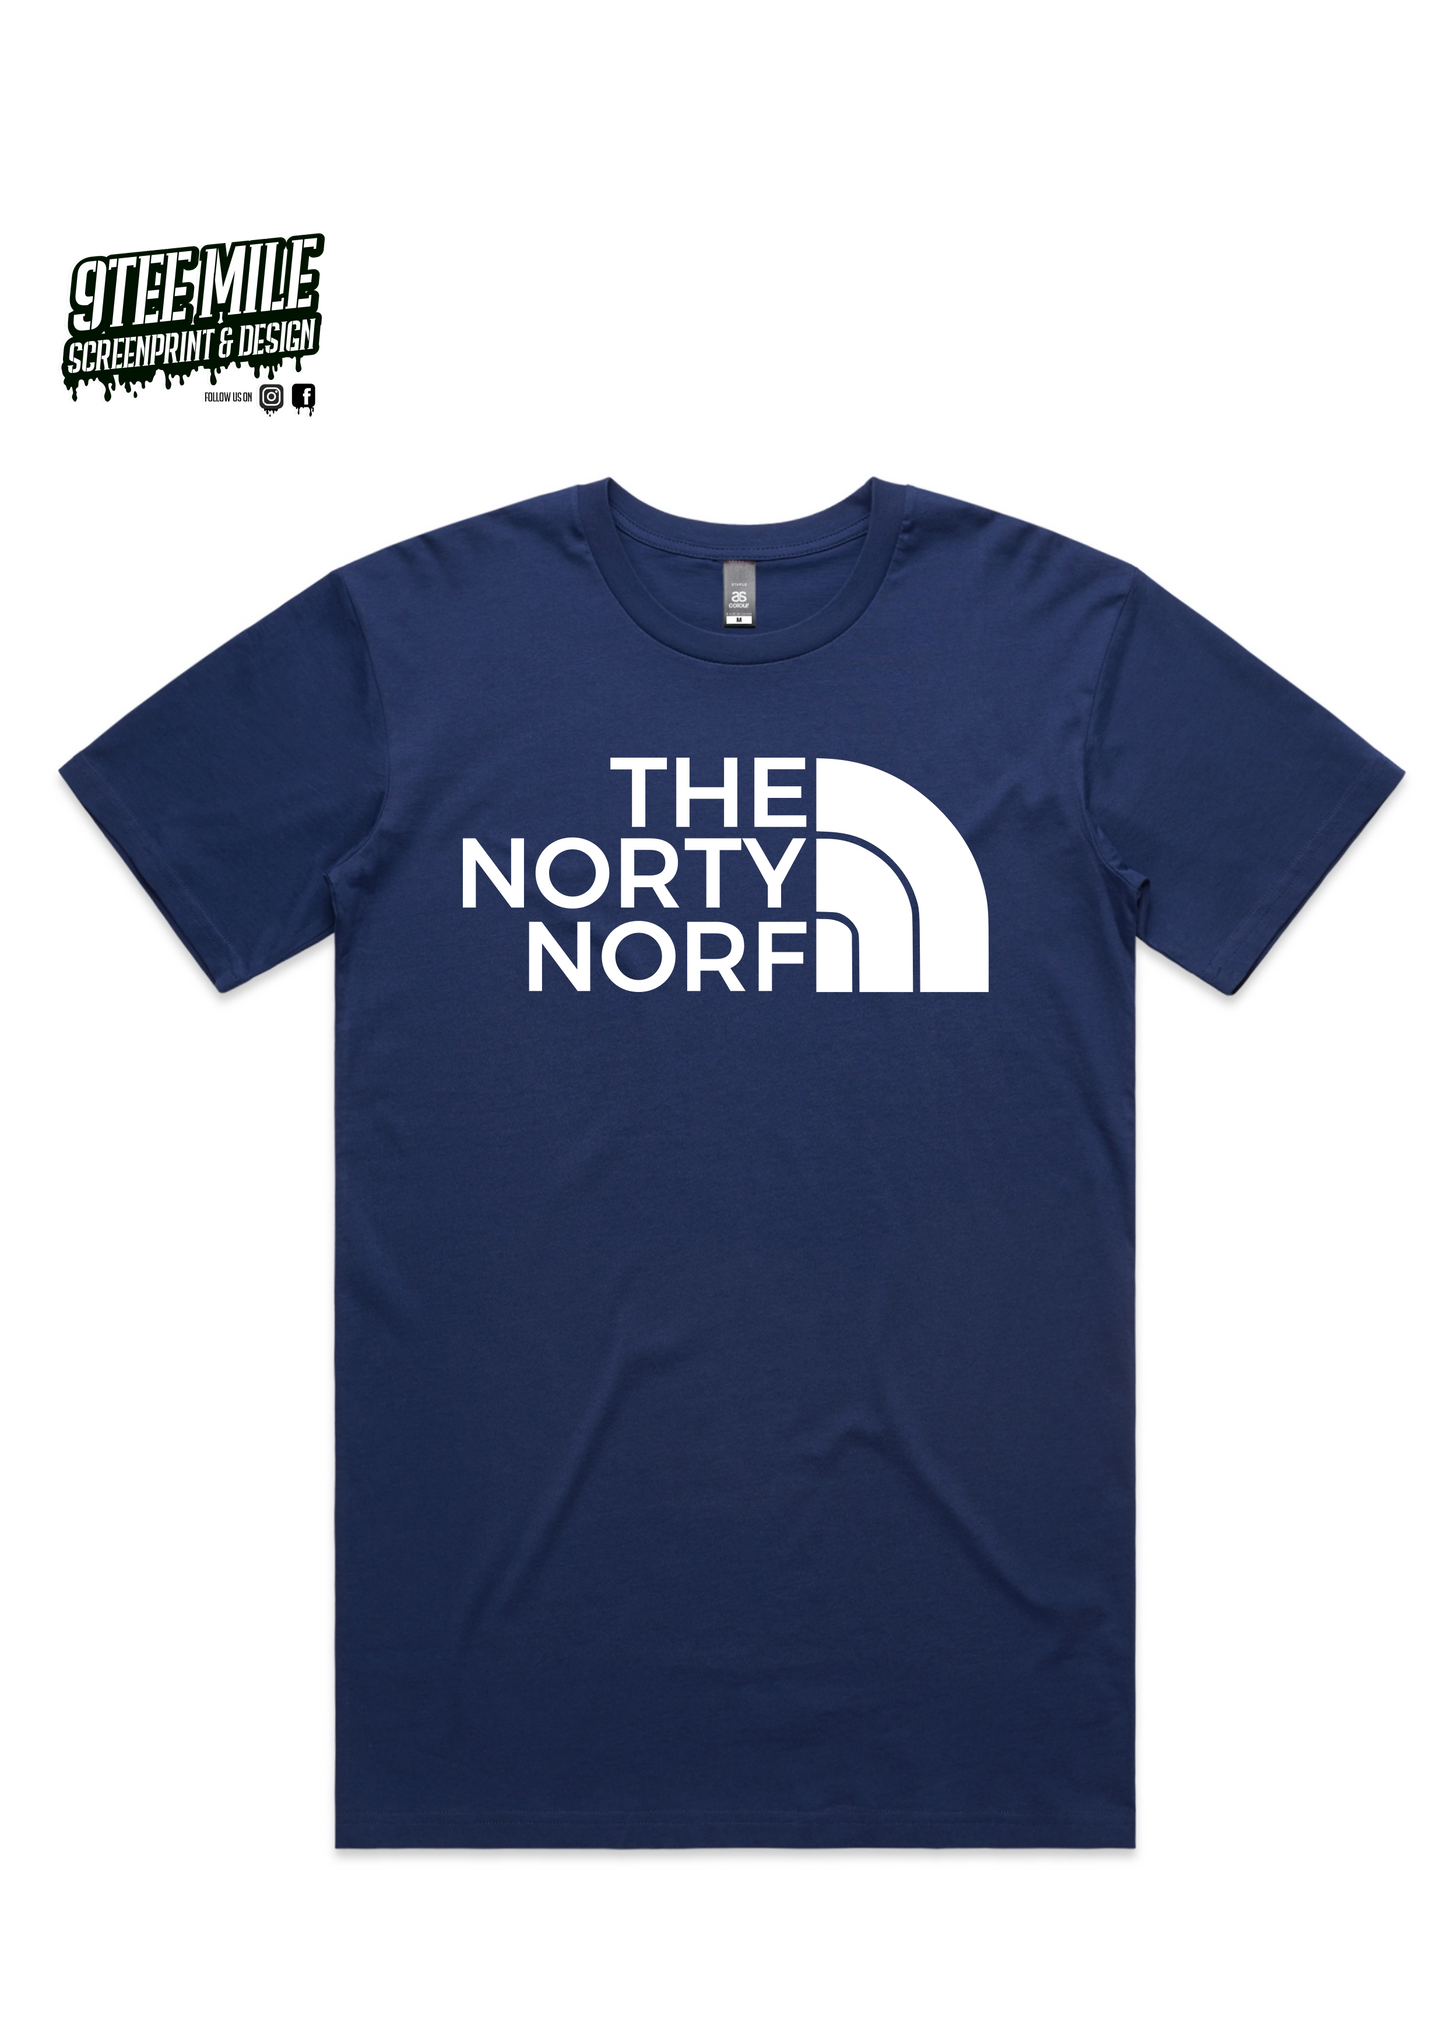 THE NORTY NORF TEES